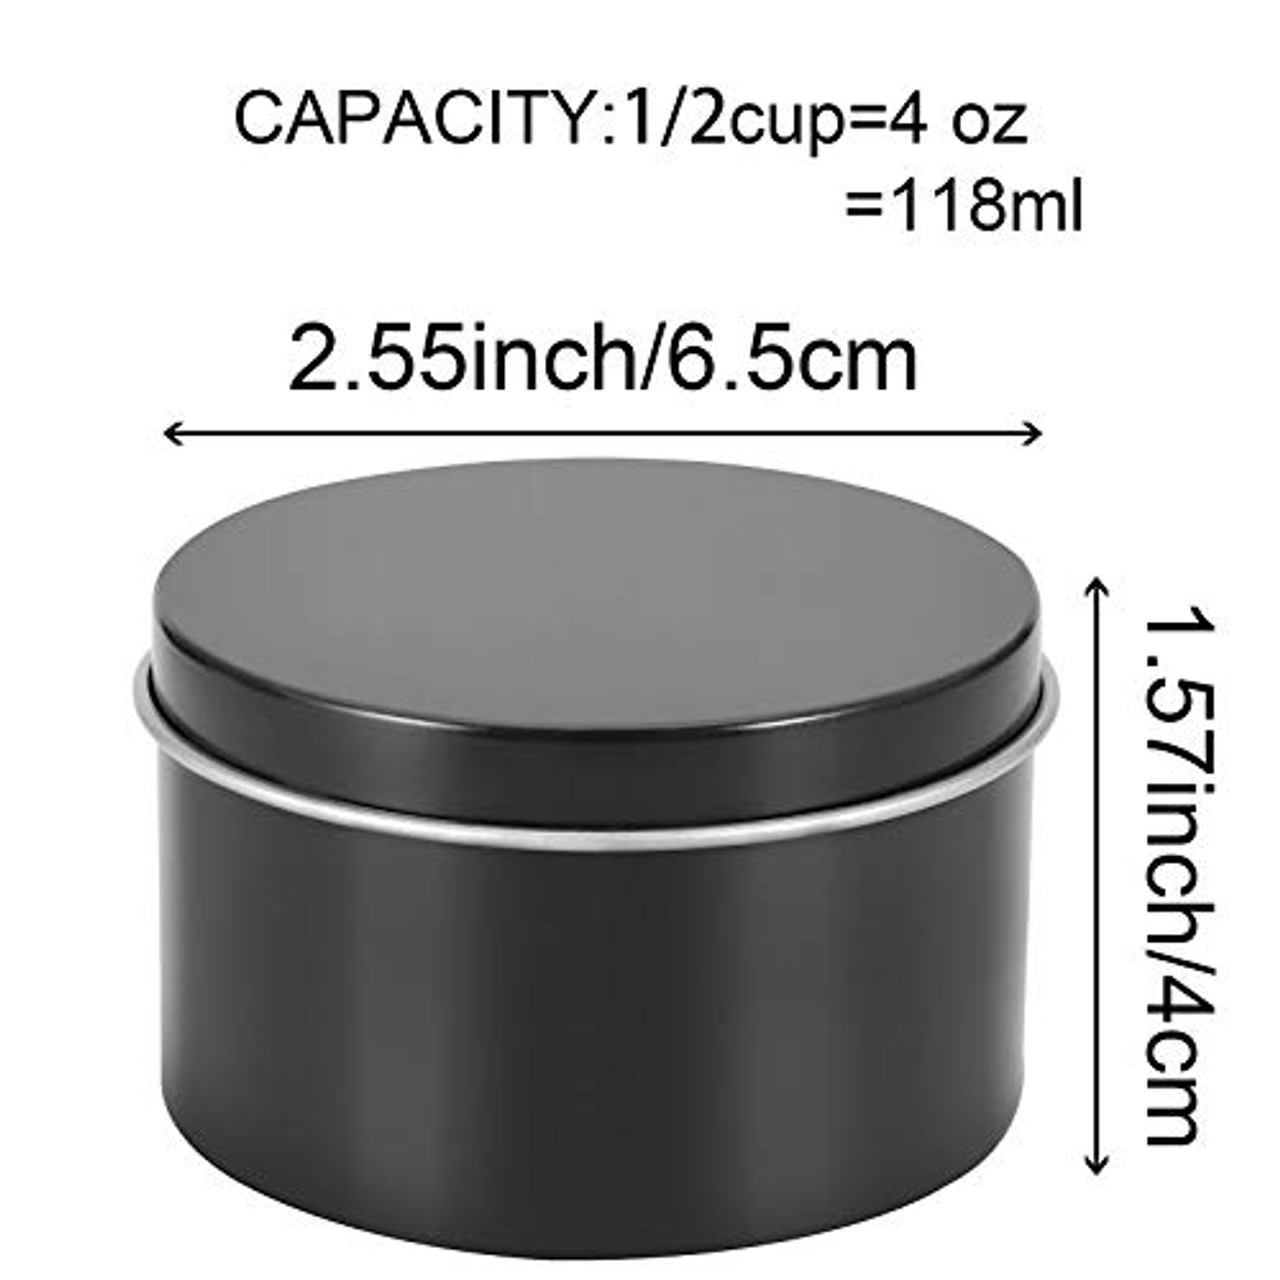 ZOENHOU 28 Pack 4 Oz Candle Tins, Round Empty Metal Tins with Lids